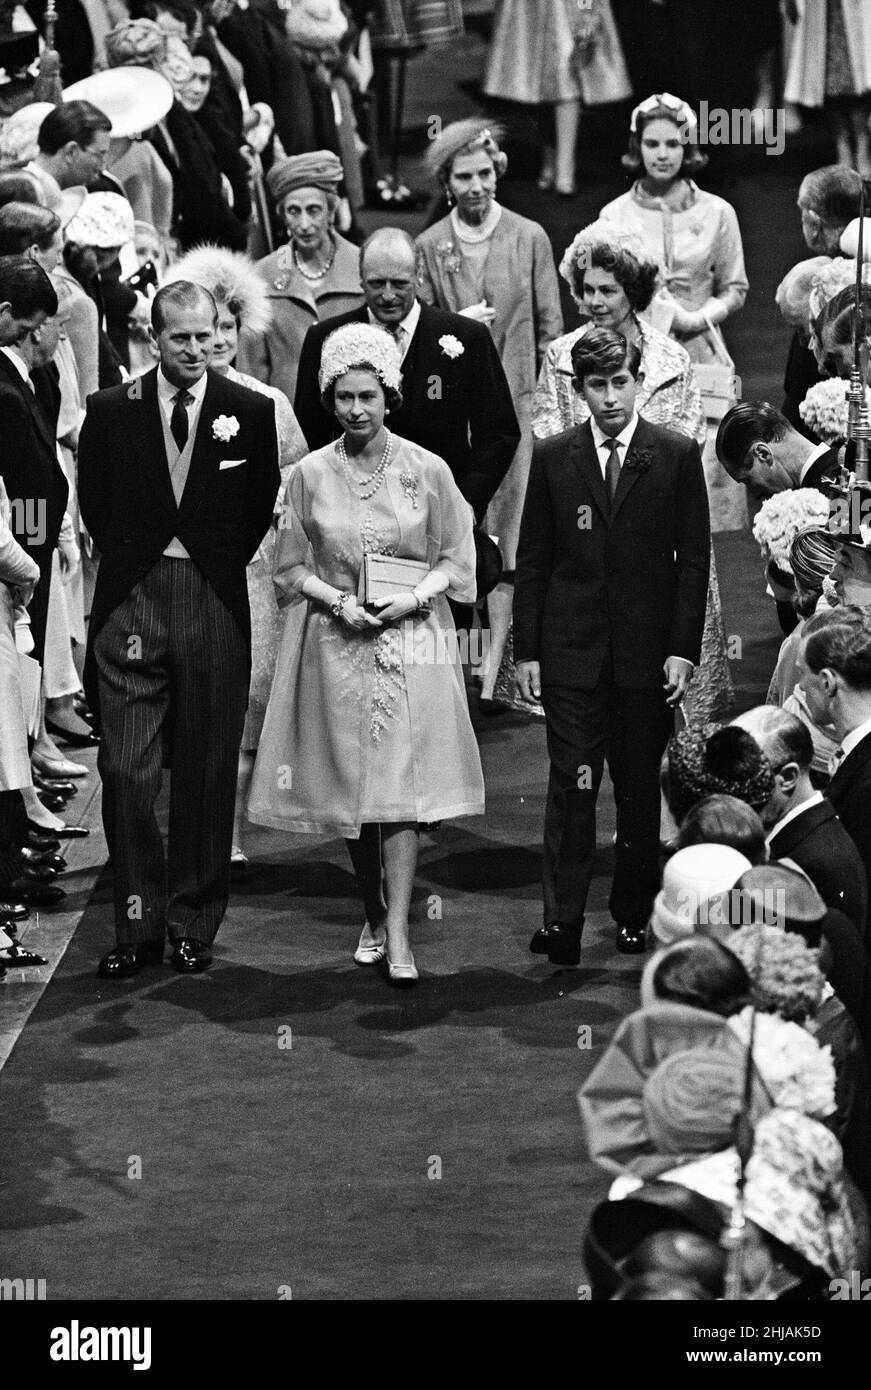 The wedding of Princess Alexandra of Kent and Angus Ogilvy at Westminster Abbey. Guests Prince Philip, Queen Elizabeth II and Prince Charles arrive. 24th April 1963. Stock Photo